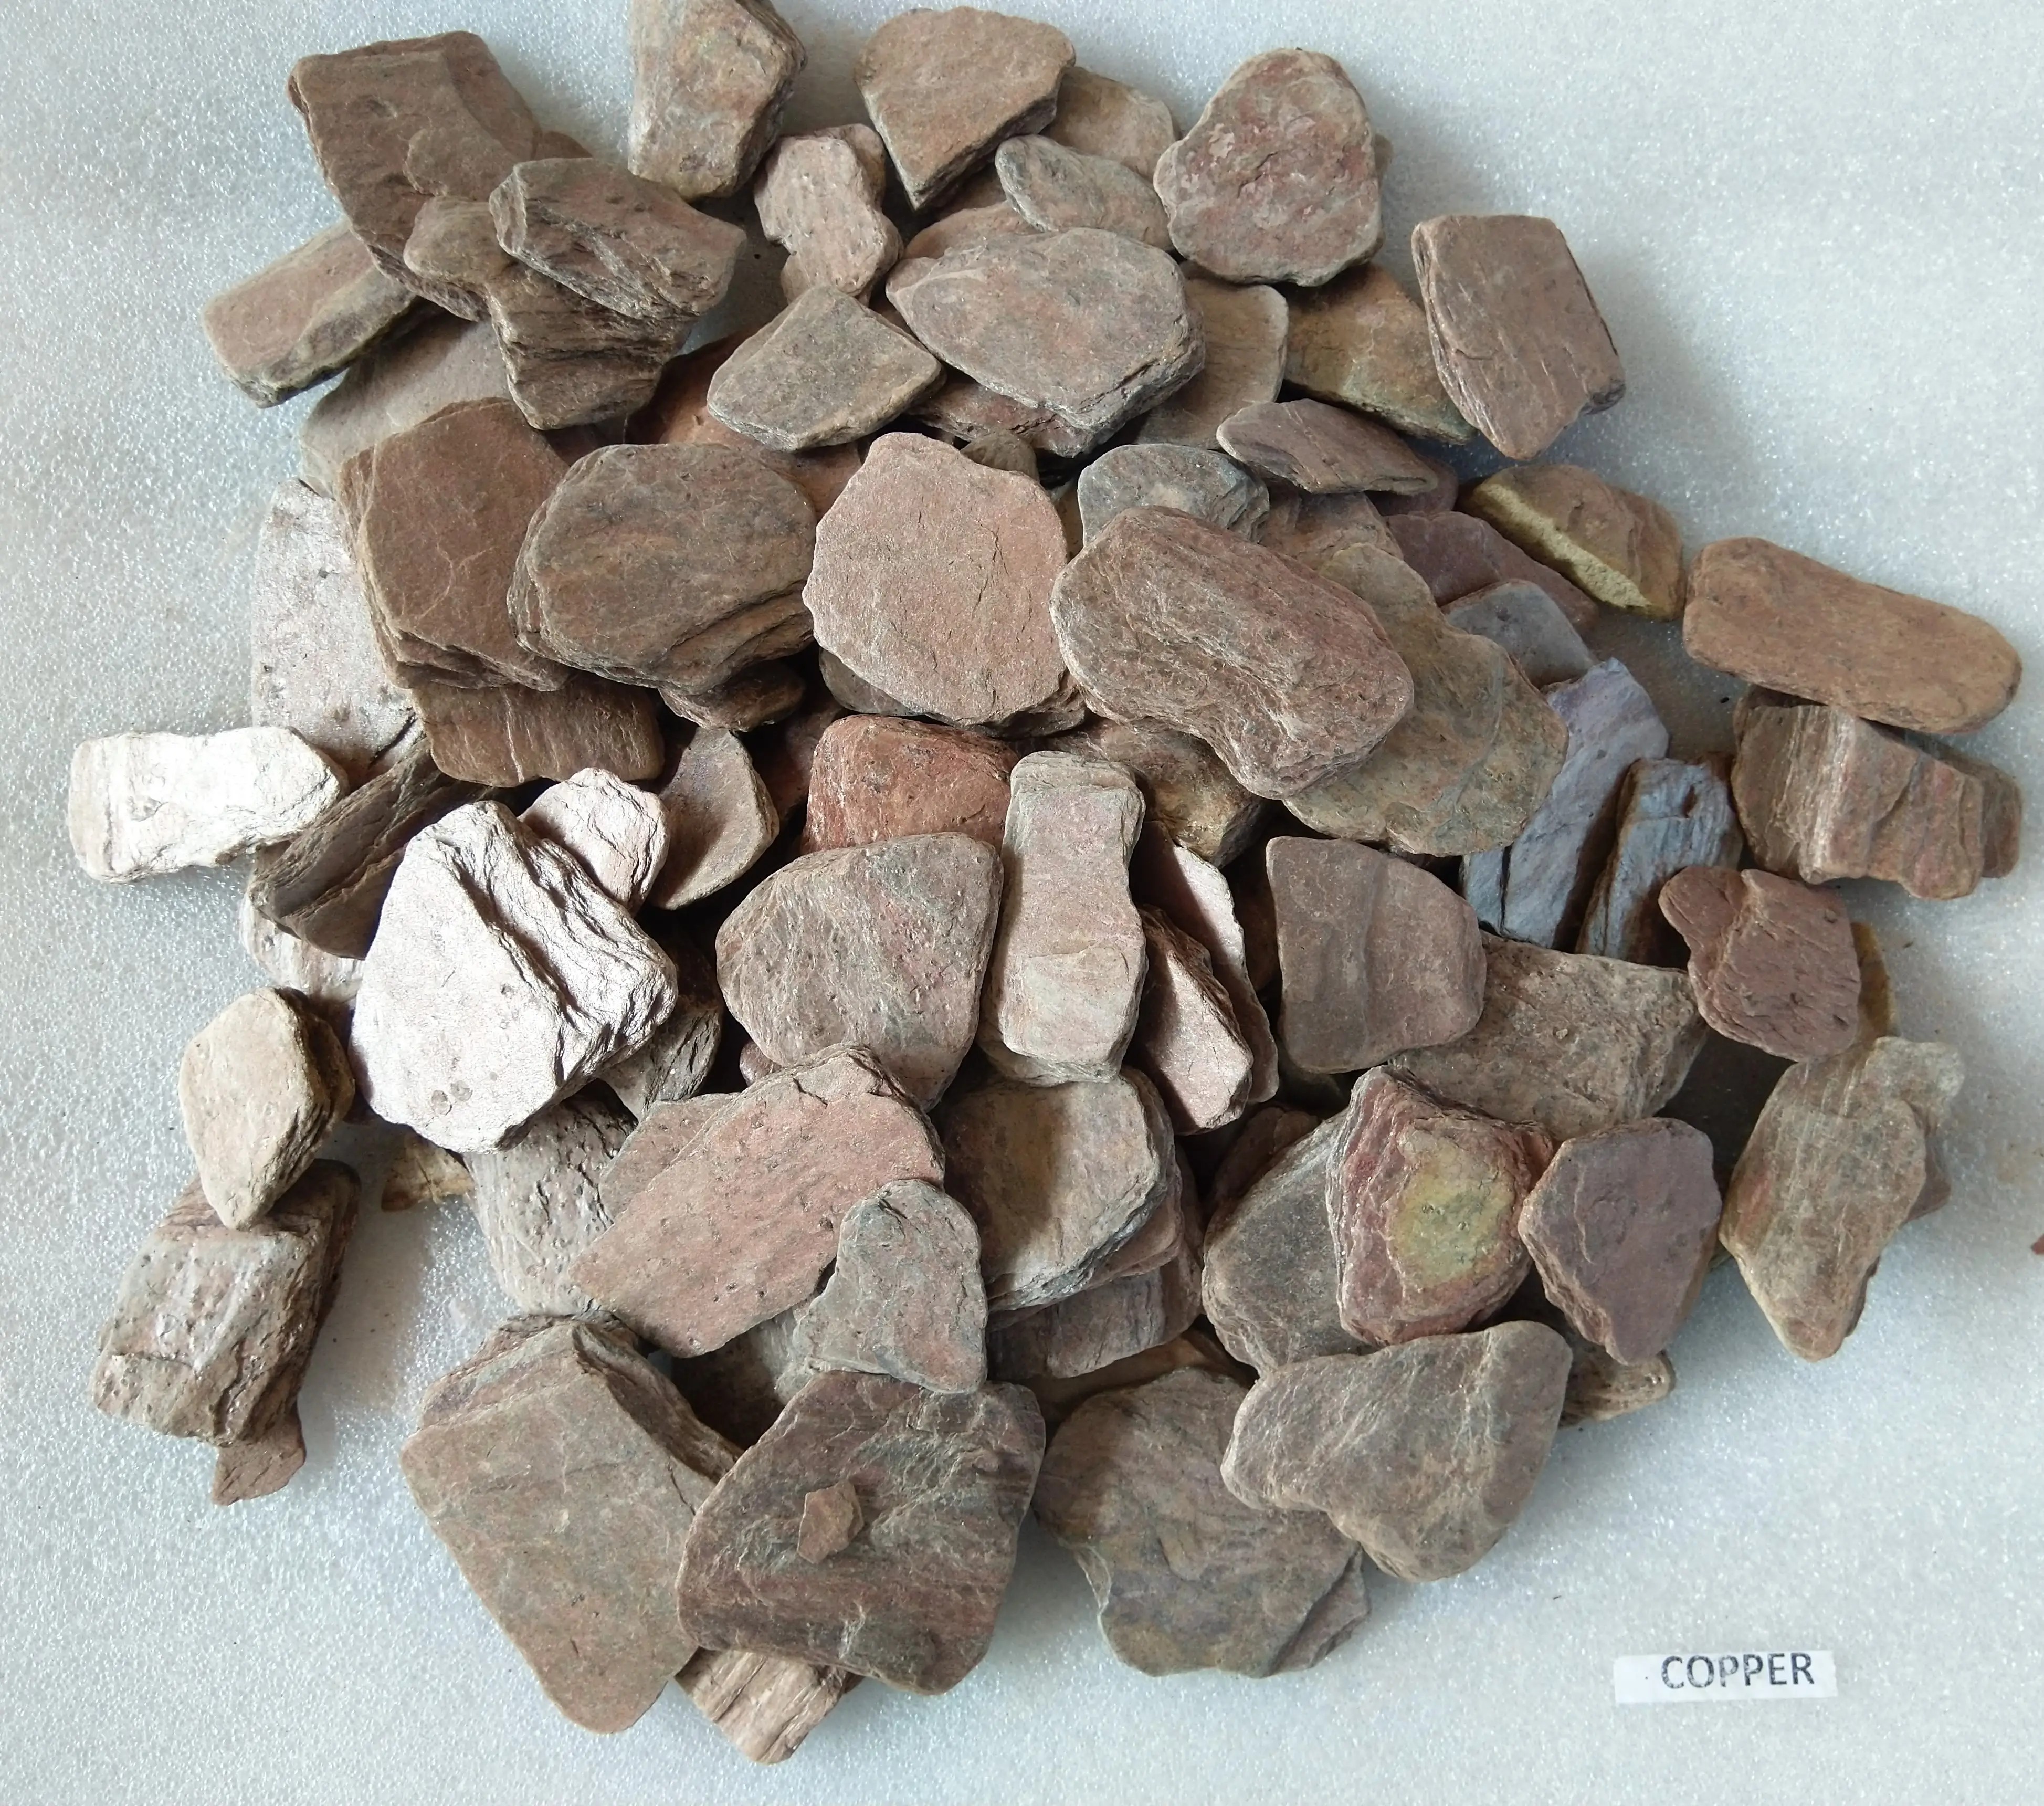 Indian Copper Slate Aggregates paddle stones for landscaping